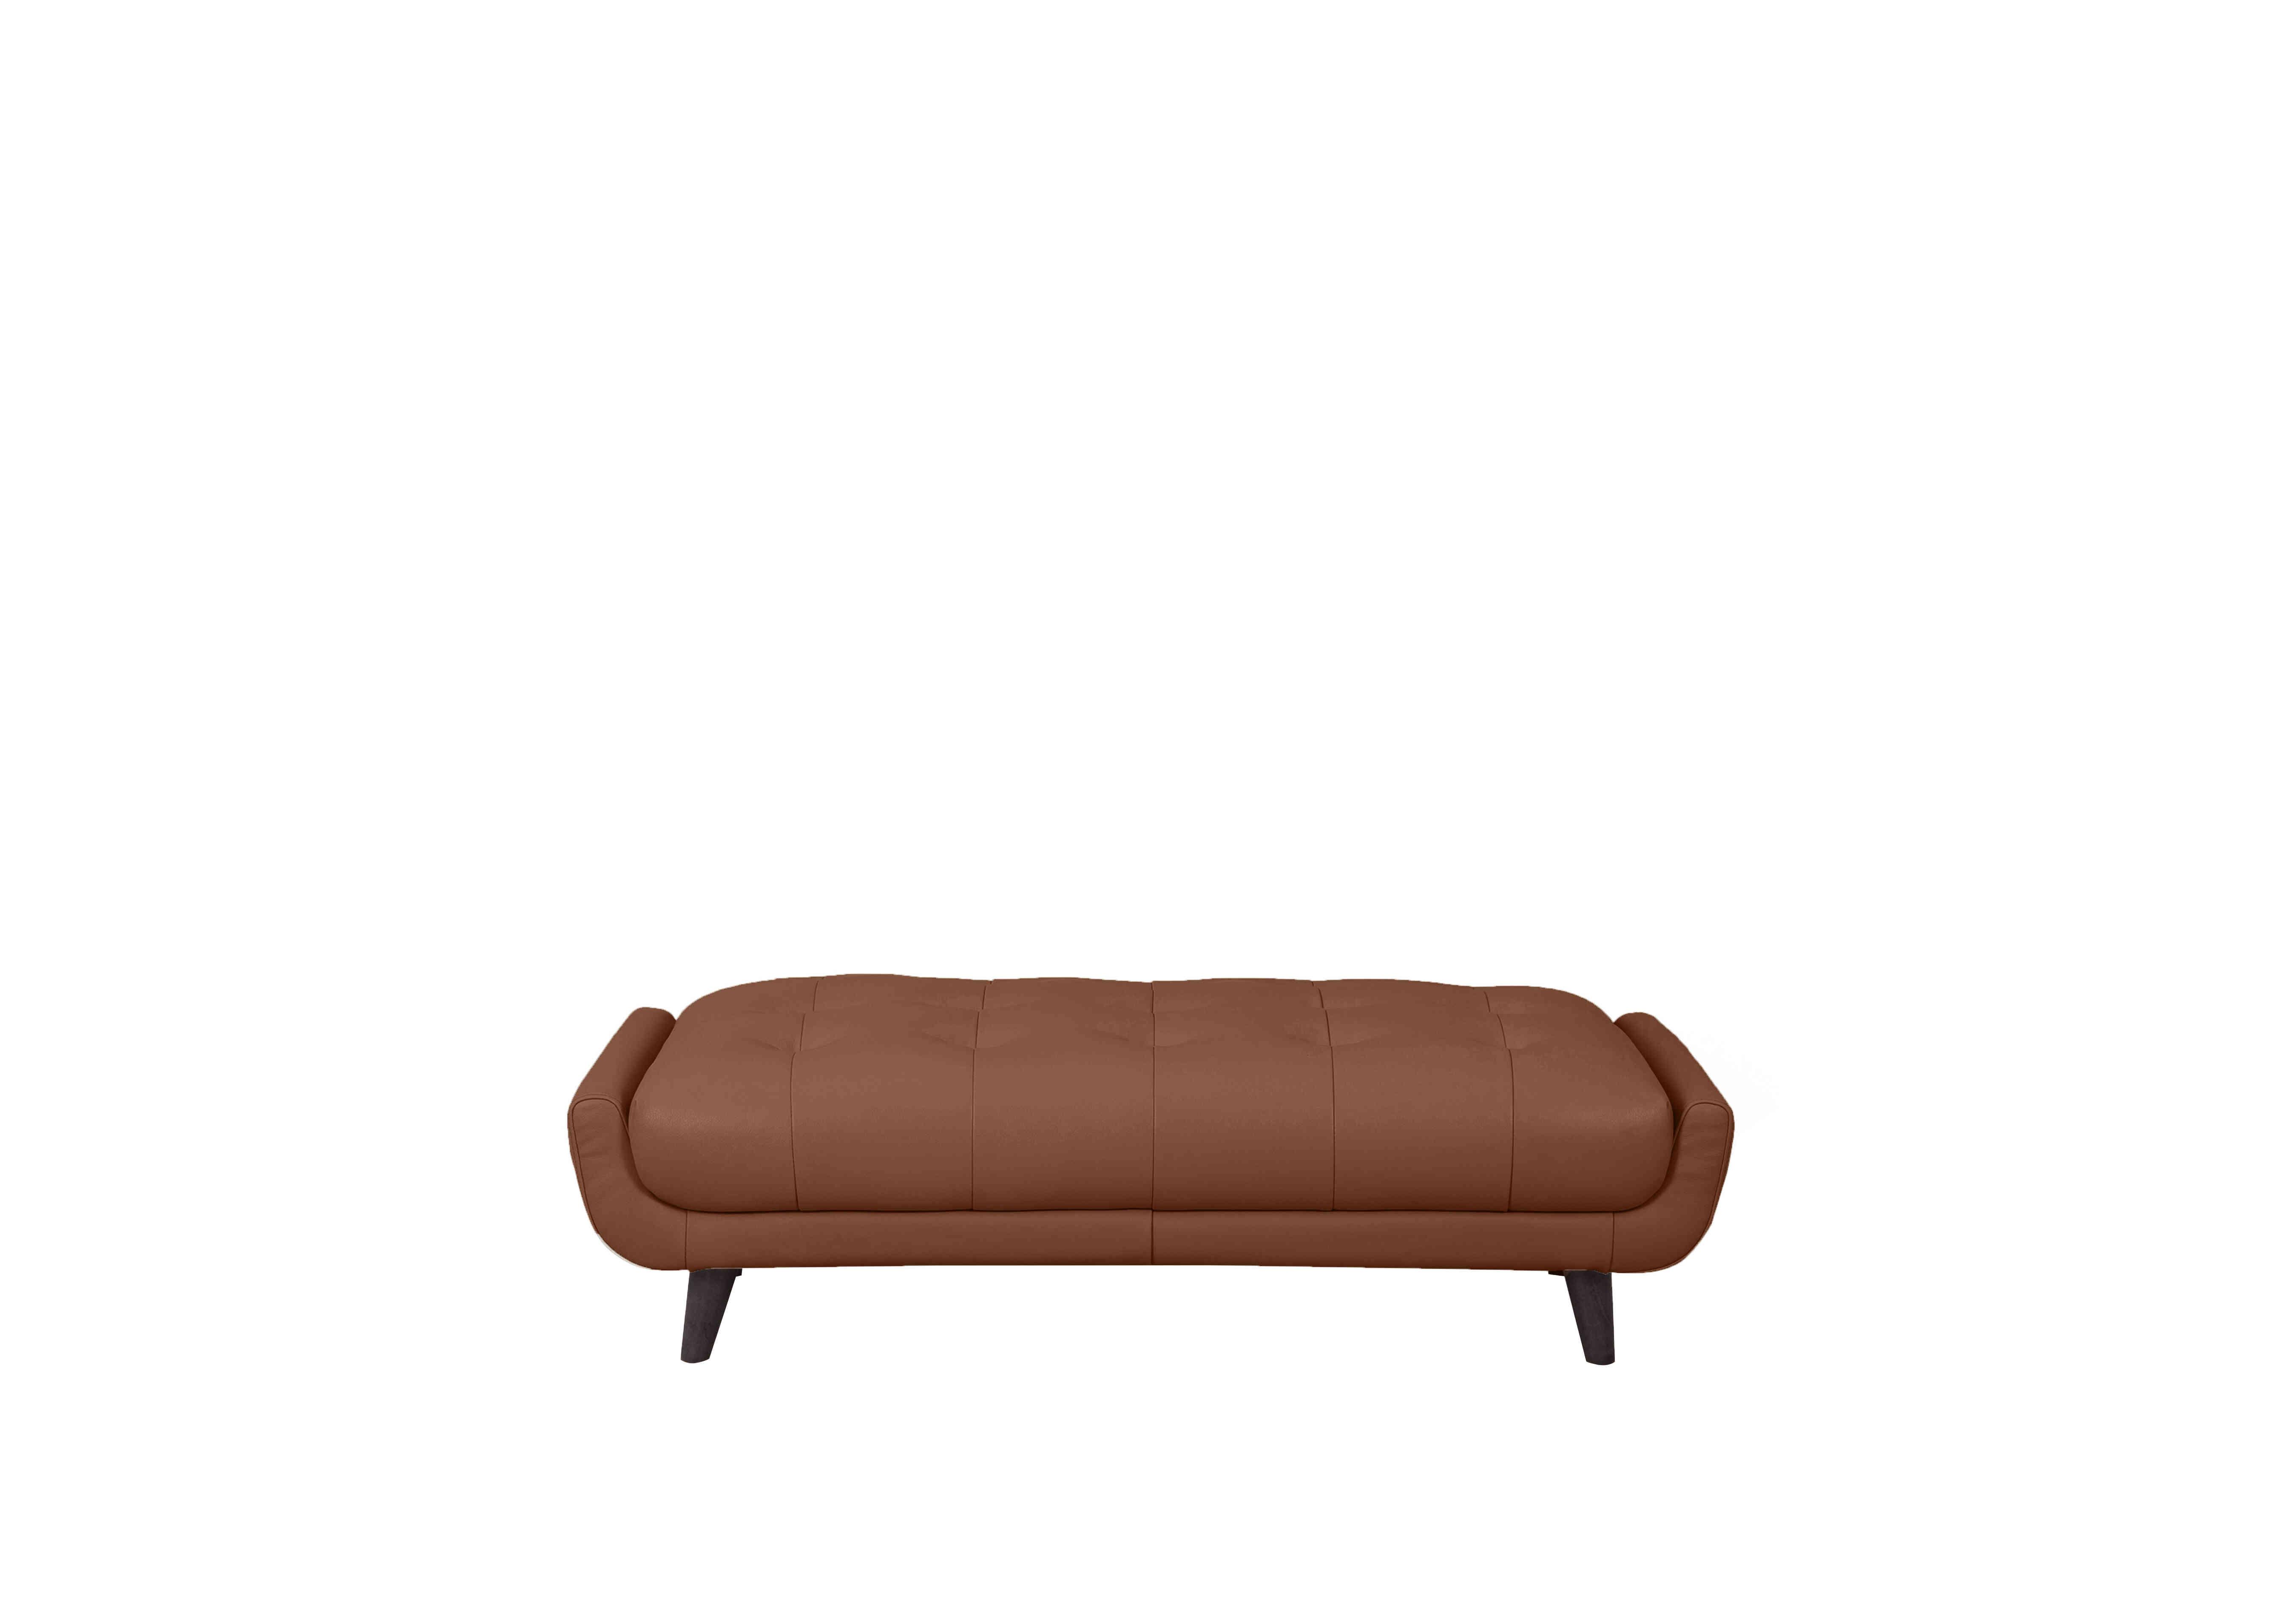 Rene Large Leather Footstool in Florida Butterscotch on Furniture Village